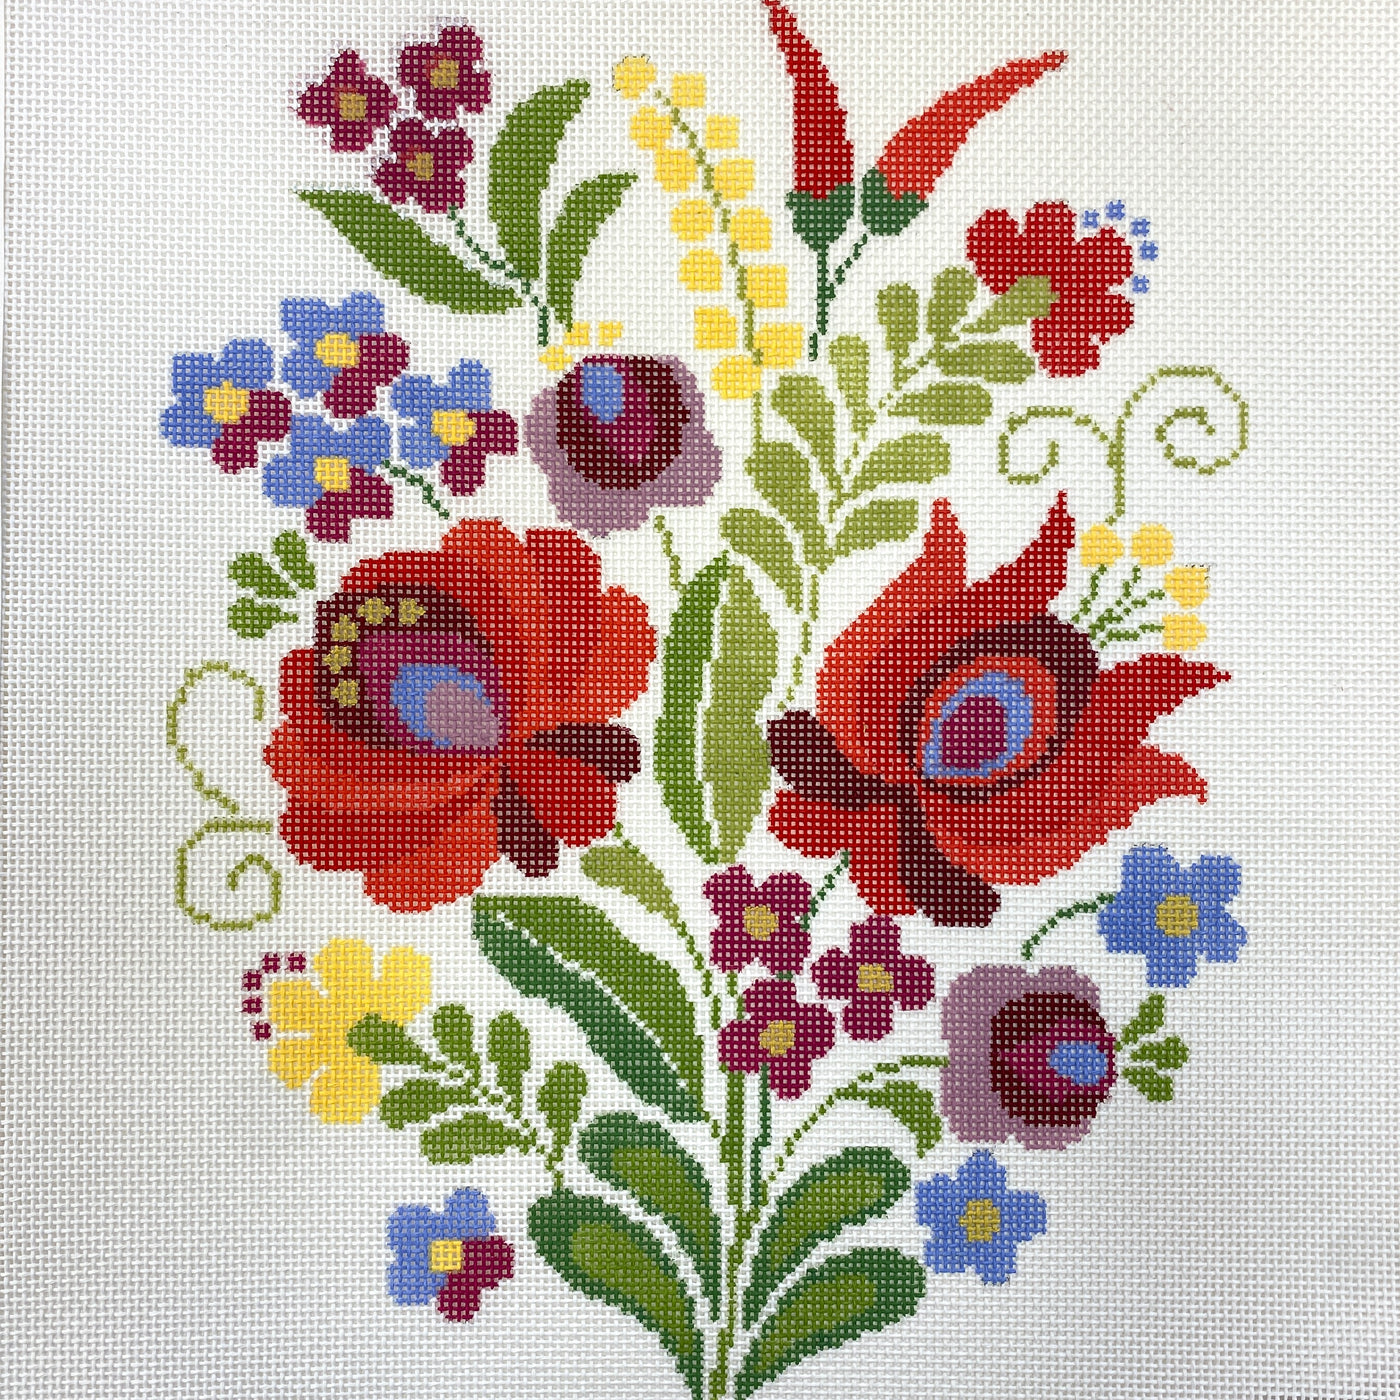 Hungarian Flowers and Peppers Needlepoint Canvas